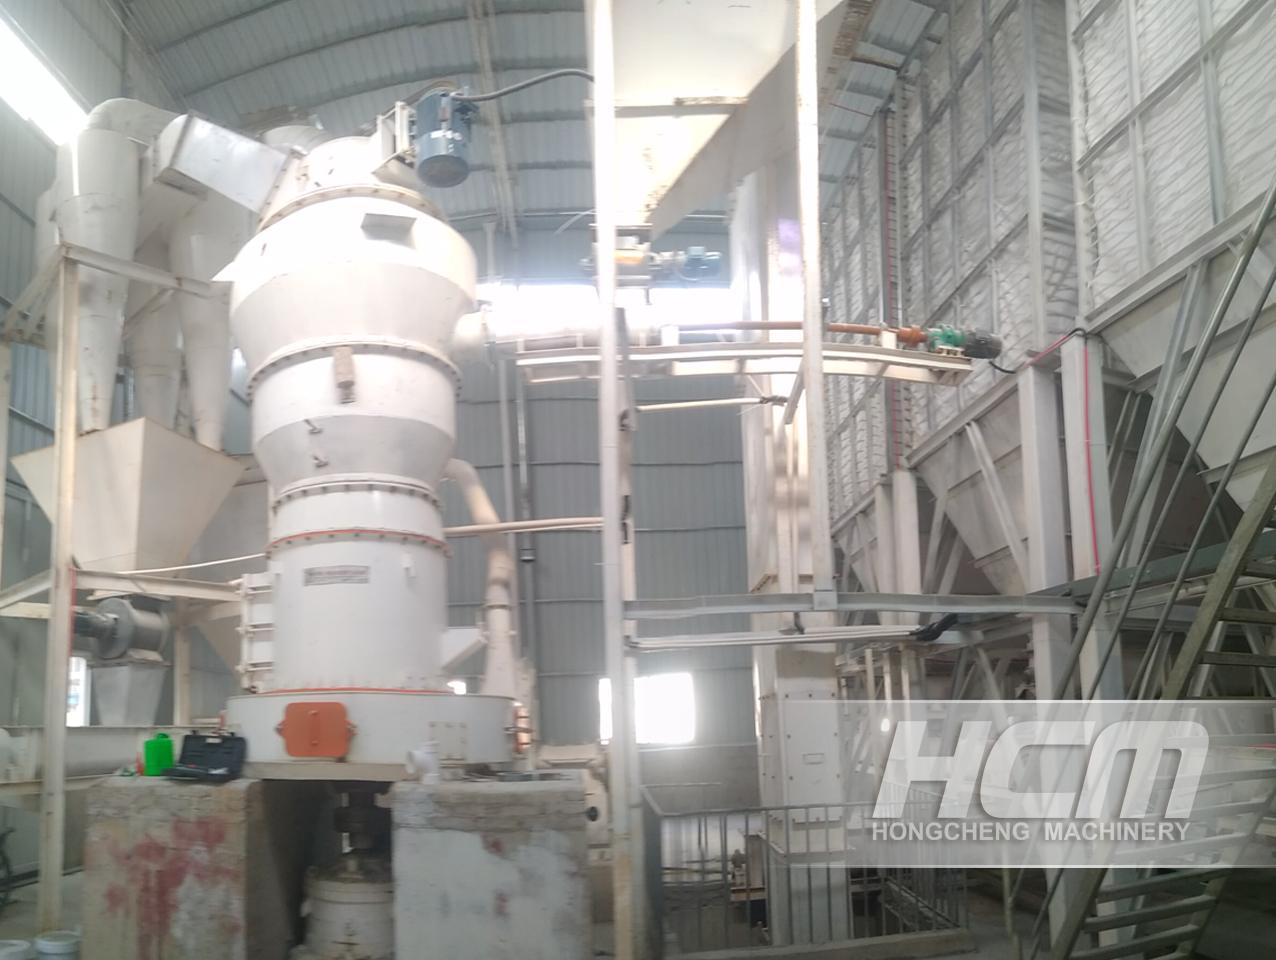 What Is The Price Of Equipment For Calcium Hydroxide Production Line in Guangxi?